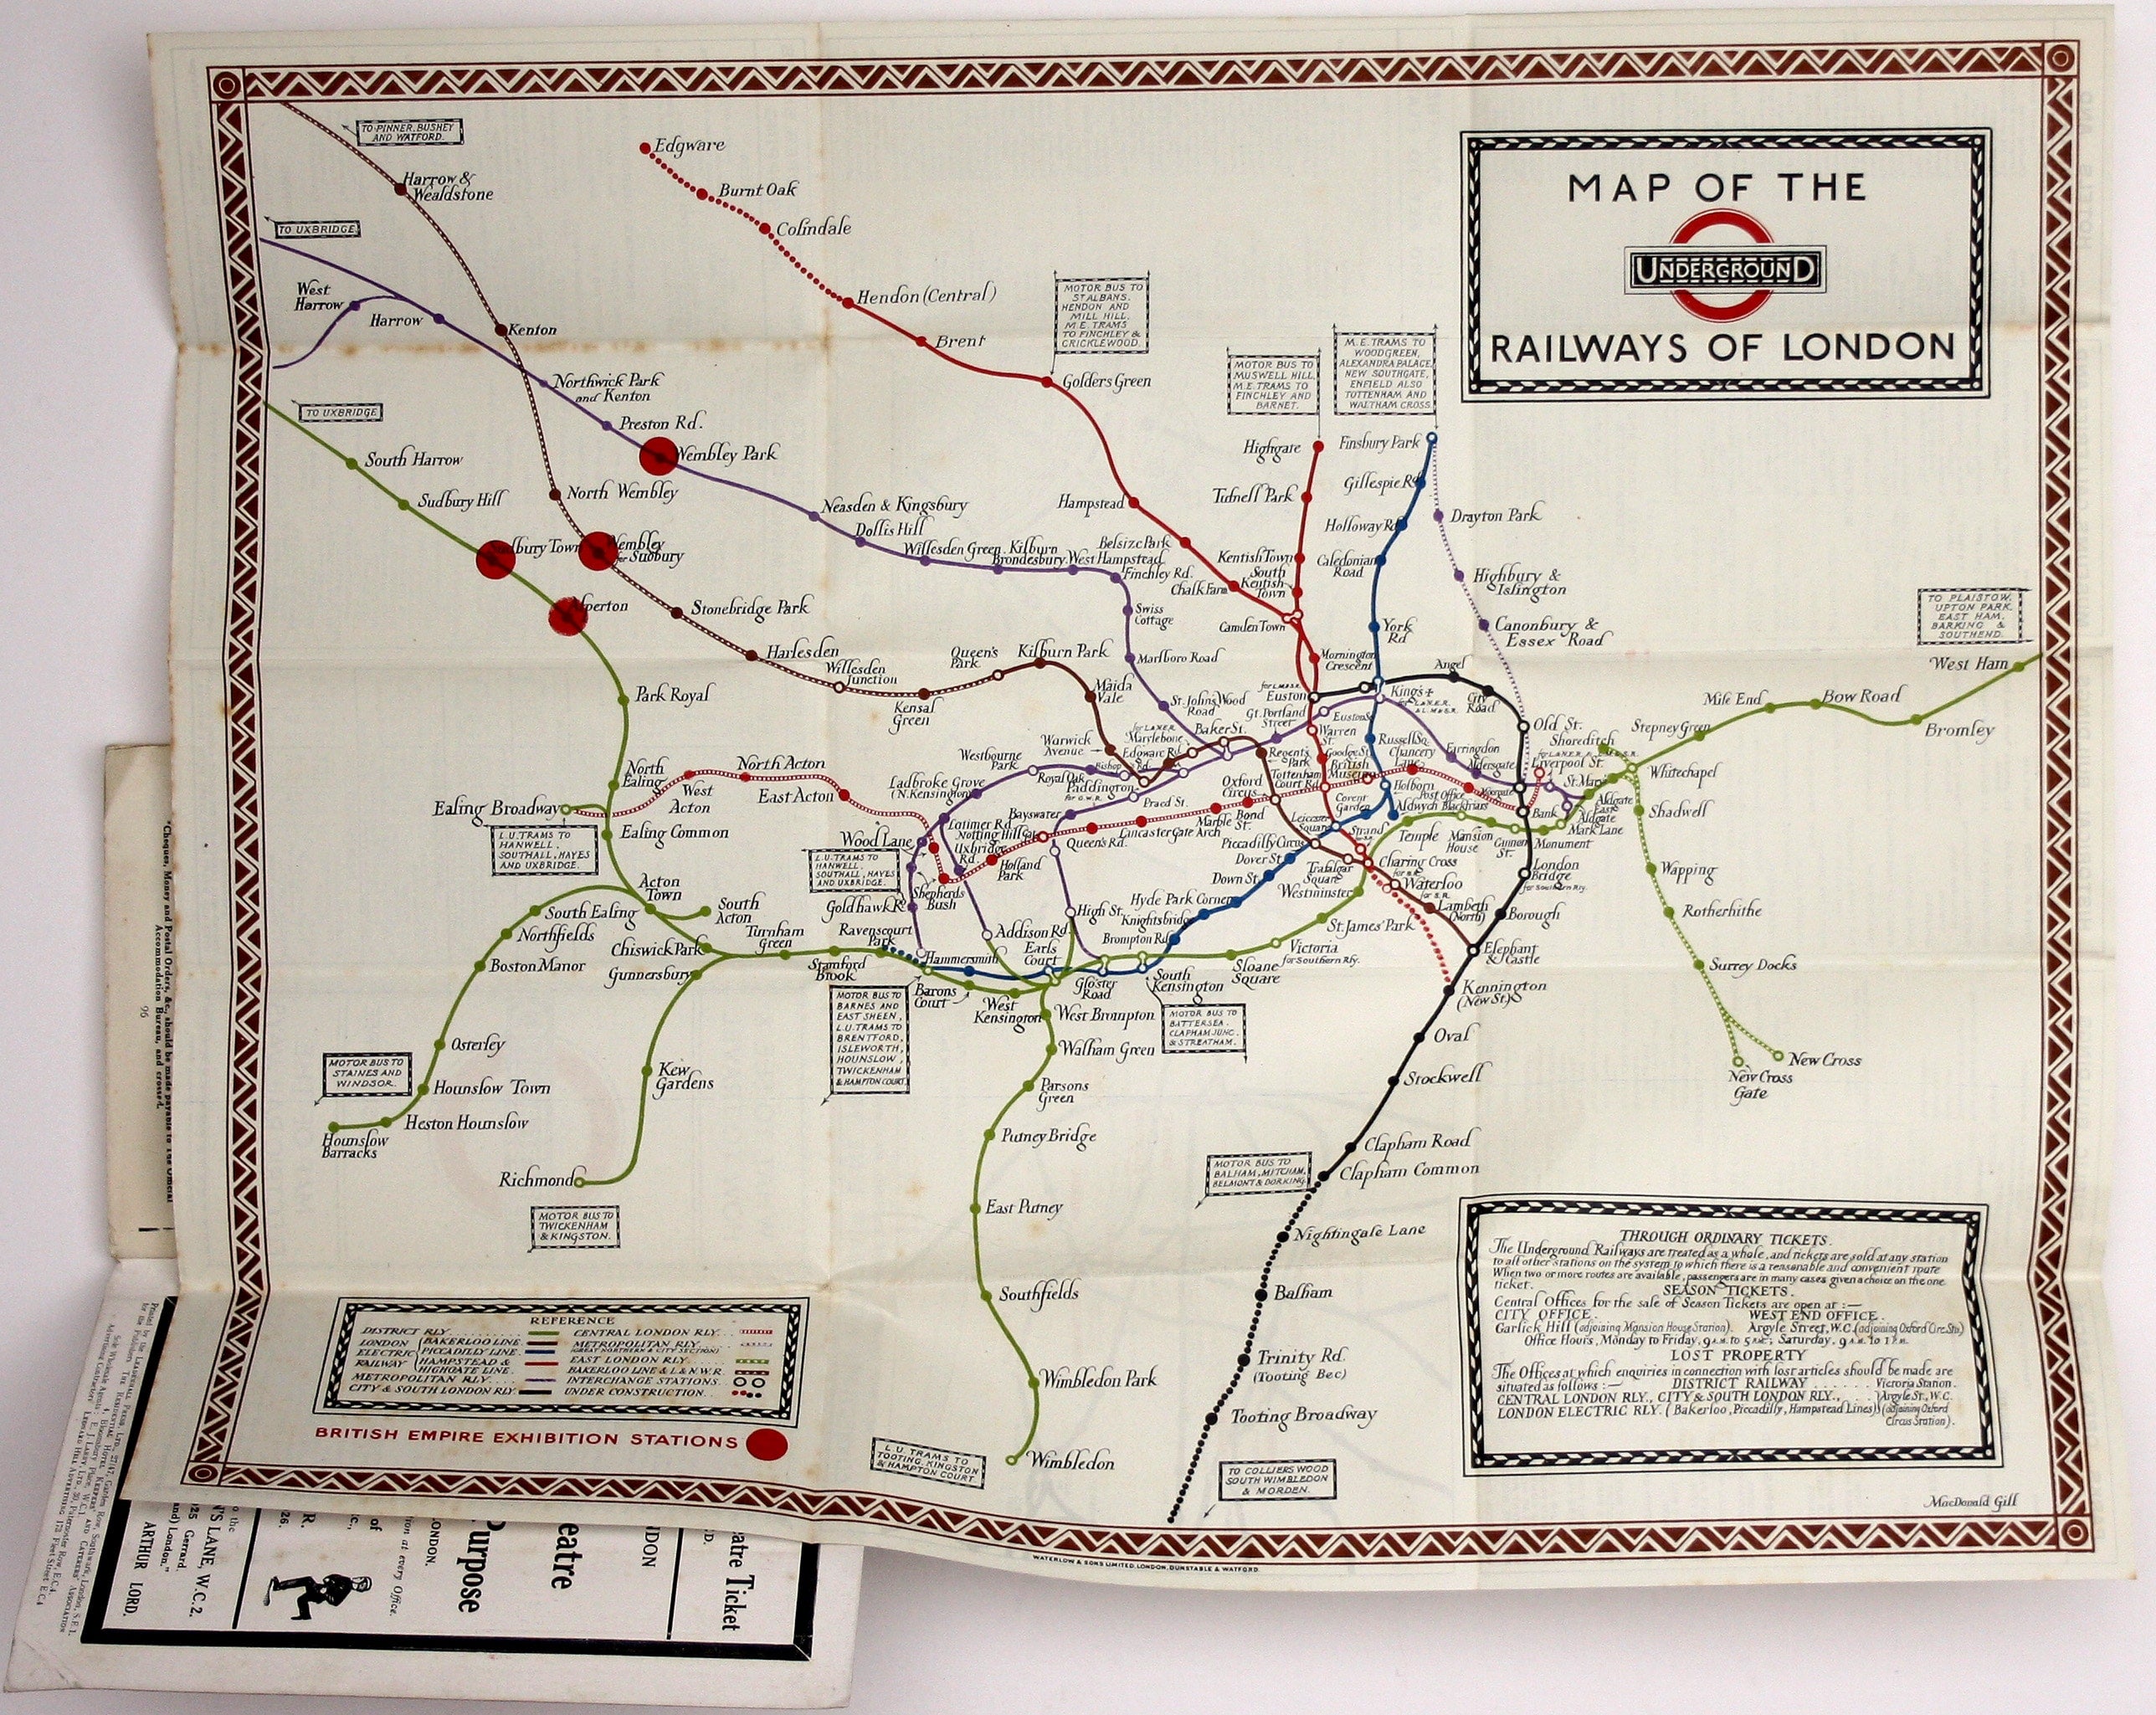 Gill’s Large Format Passenger Map